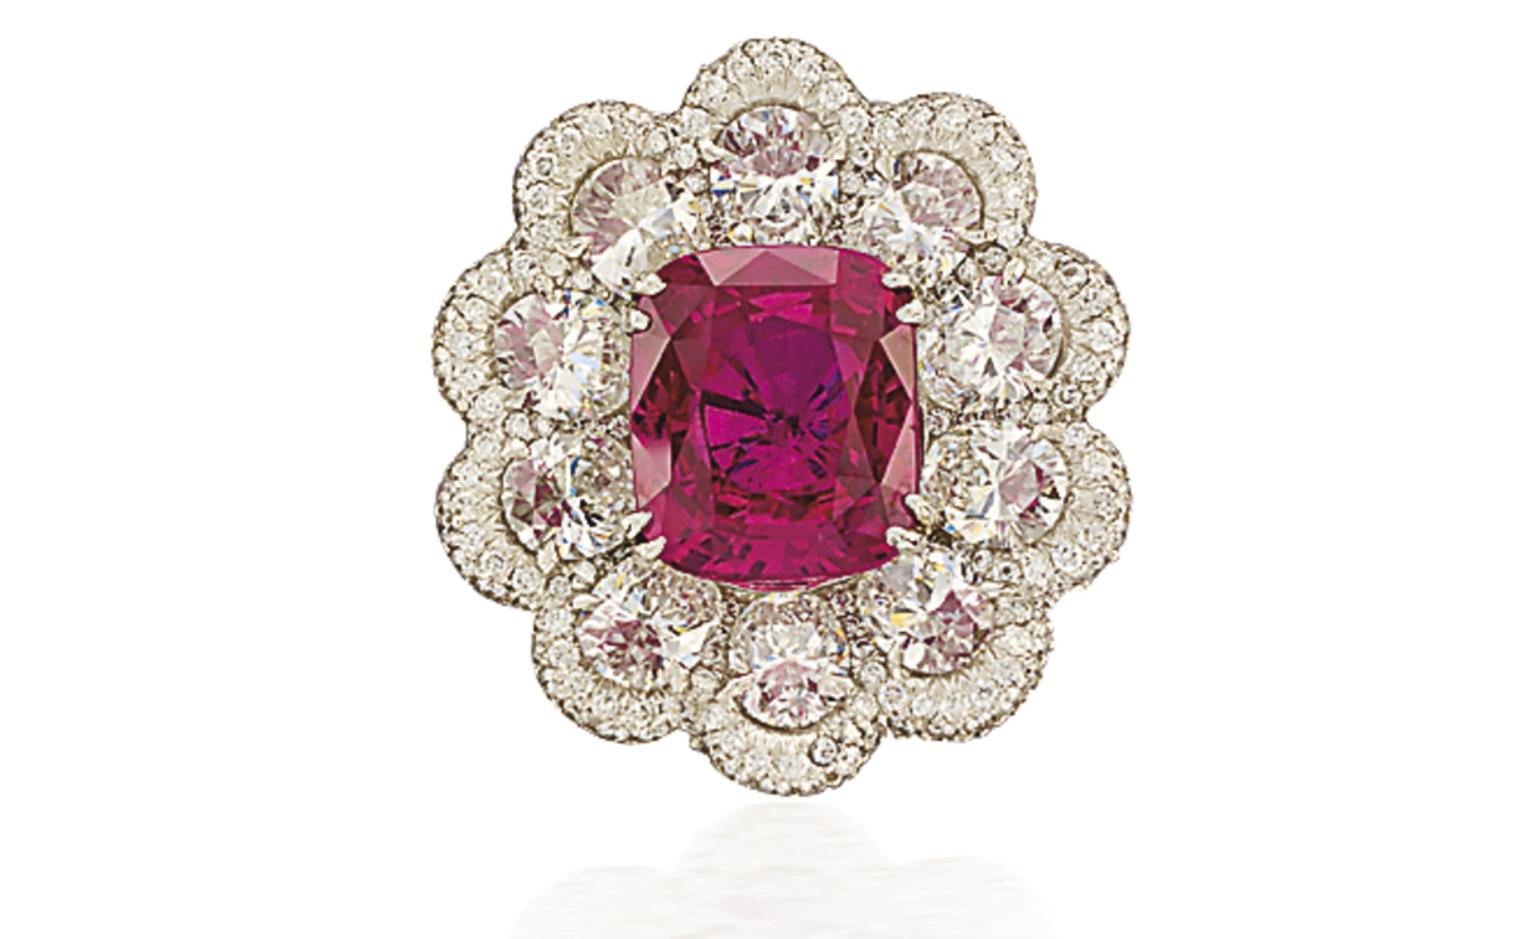 Lot 72. A fine ruby and diamond ring. Designed as a cluster centring upon a cushion-shaped ruby weighing 7.01 carats surrounded by oval-shaped diamonds weighing a total of 4.18 carats to the pavé-set diamond scalloped border and similarly-set di...